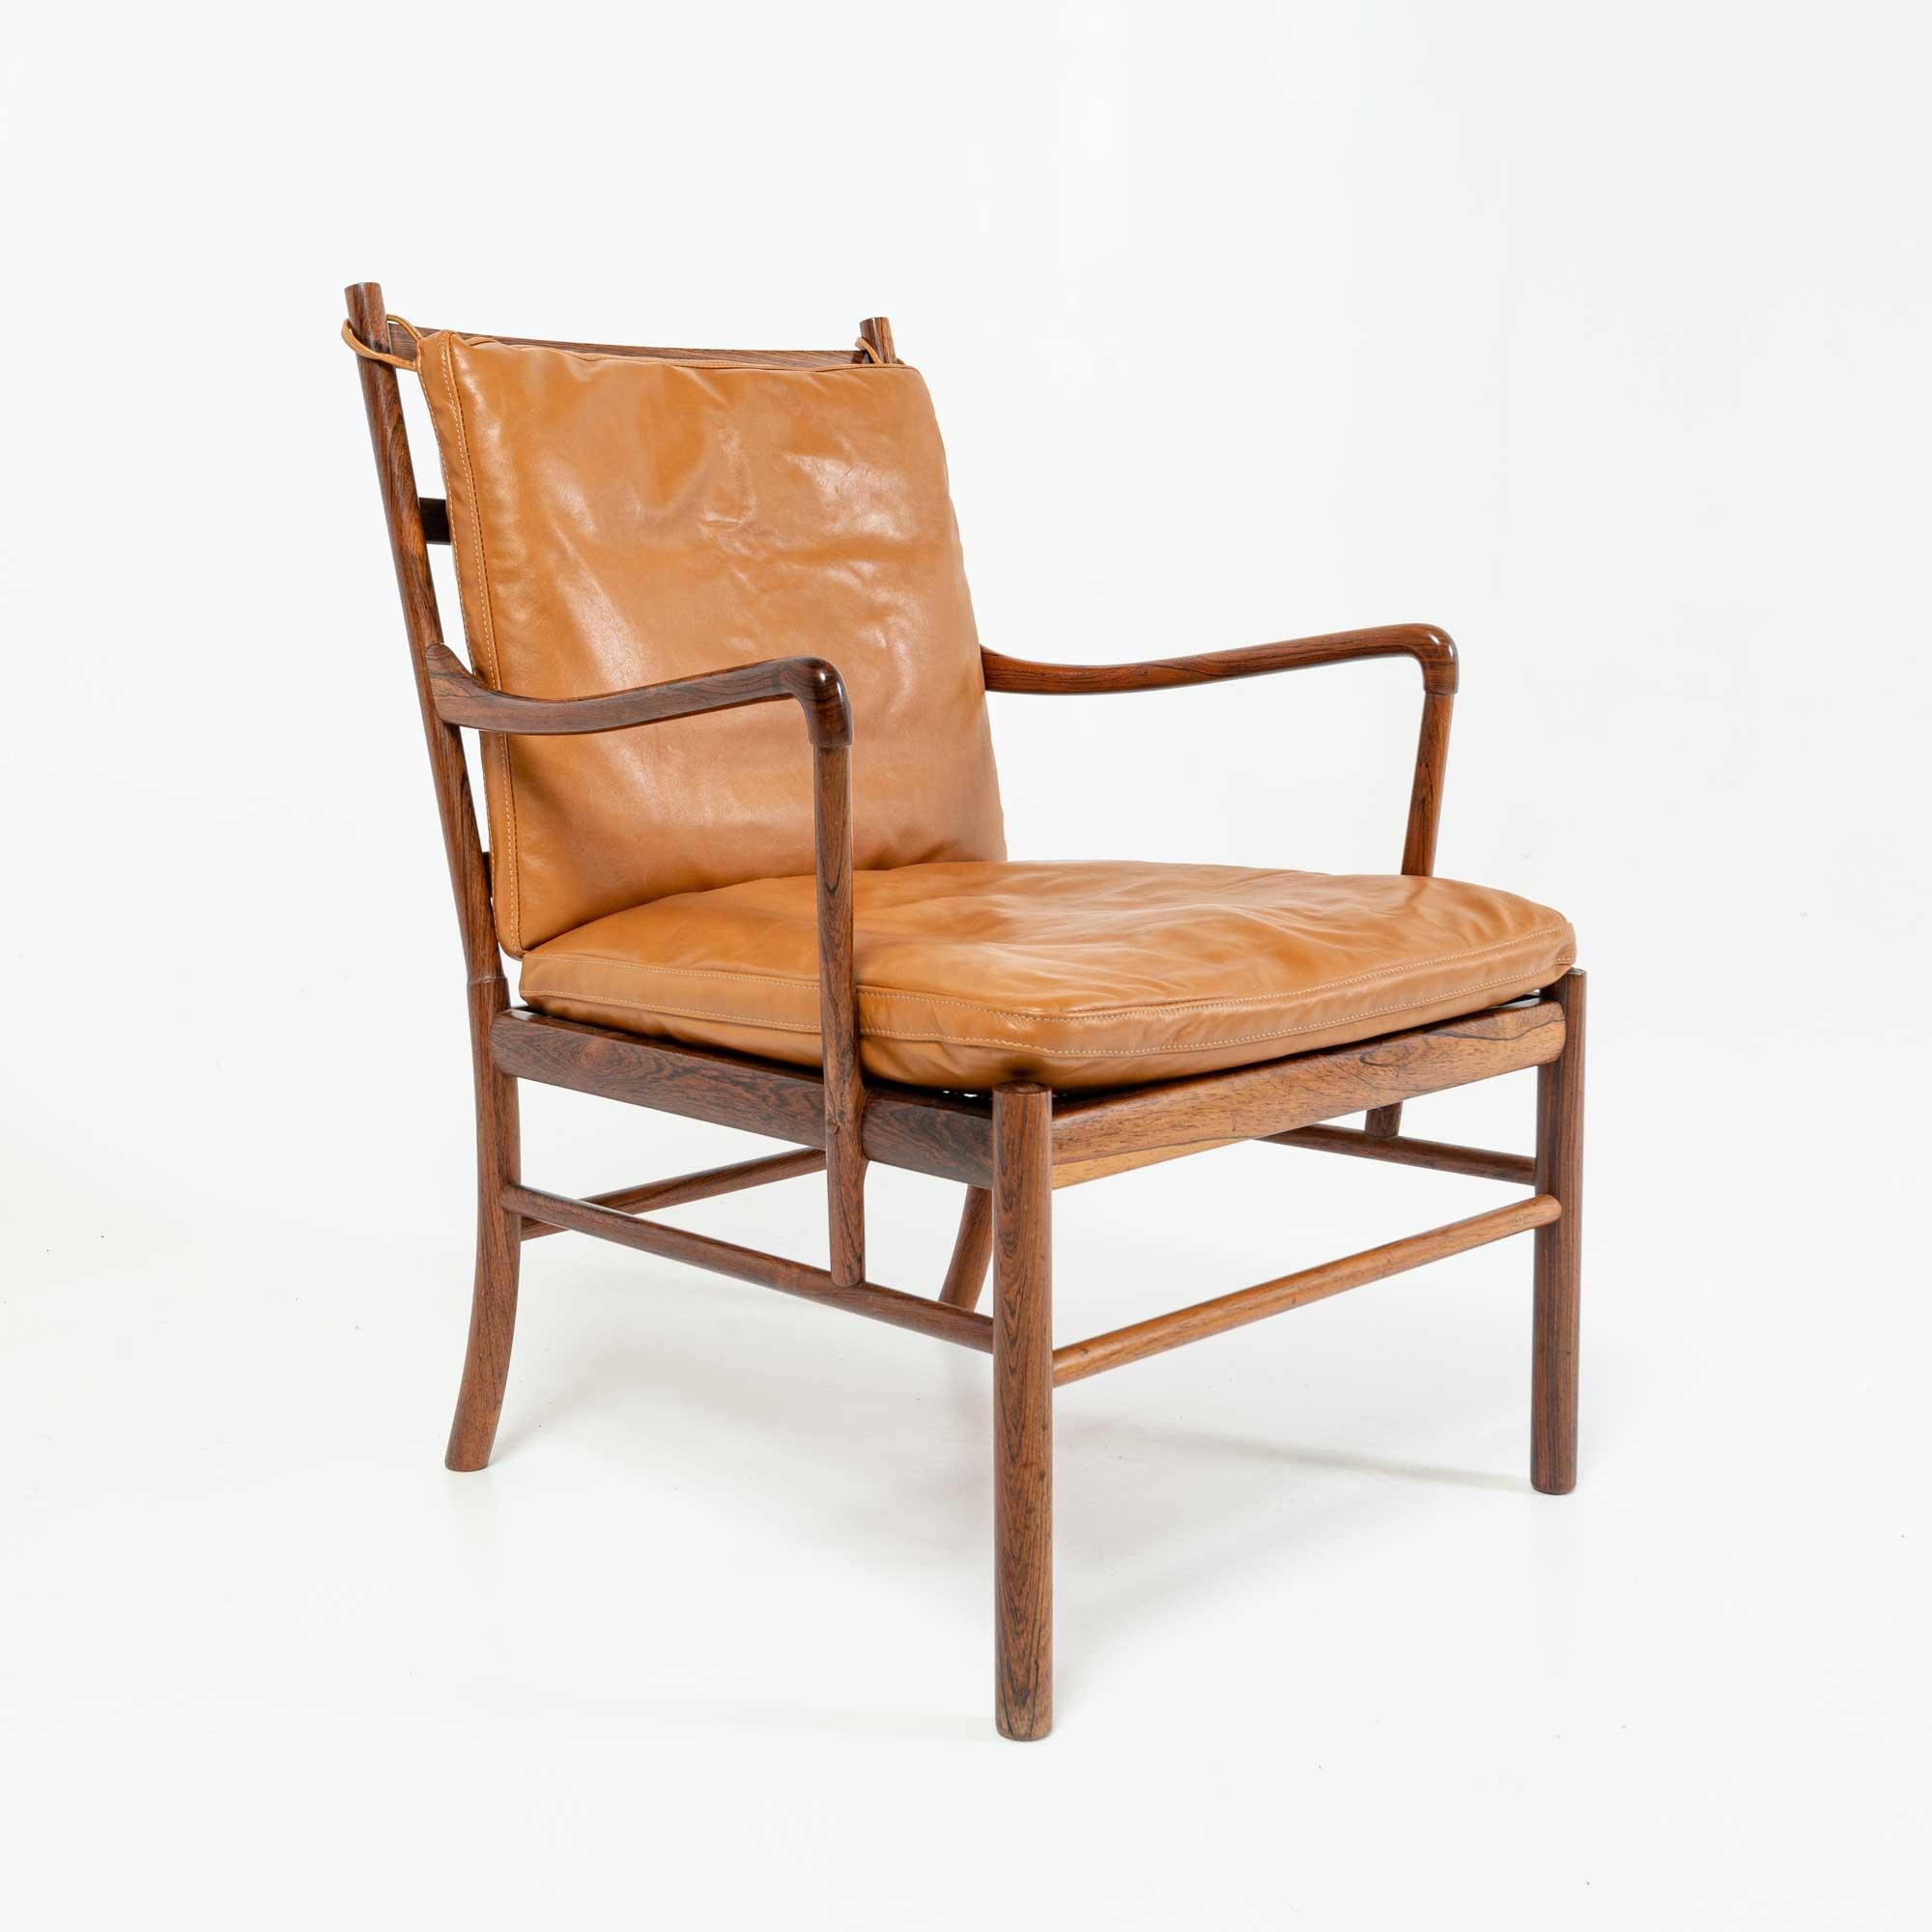 This is a rare and in exceptional condition Ole Wanscher's Colonial chair in Rosewood, with a new set of new Maharam Sorghum brown cushions. Poul Jeppesen in Denmark c1950s and distributed by Illums Bolighus with solid rosewood for the frame, cane